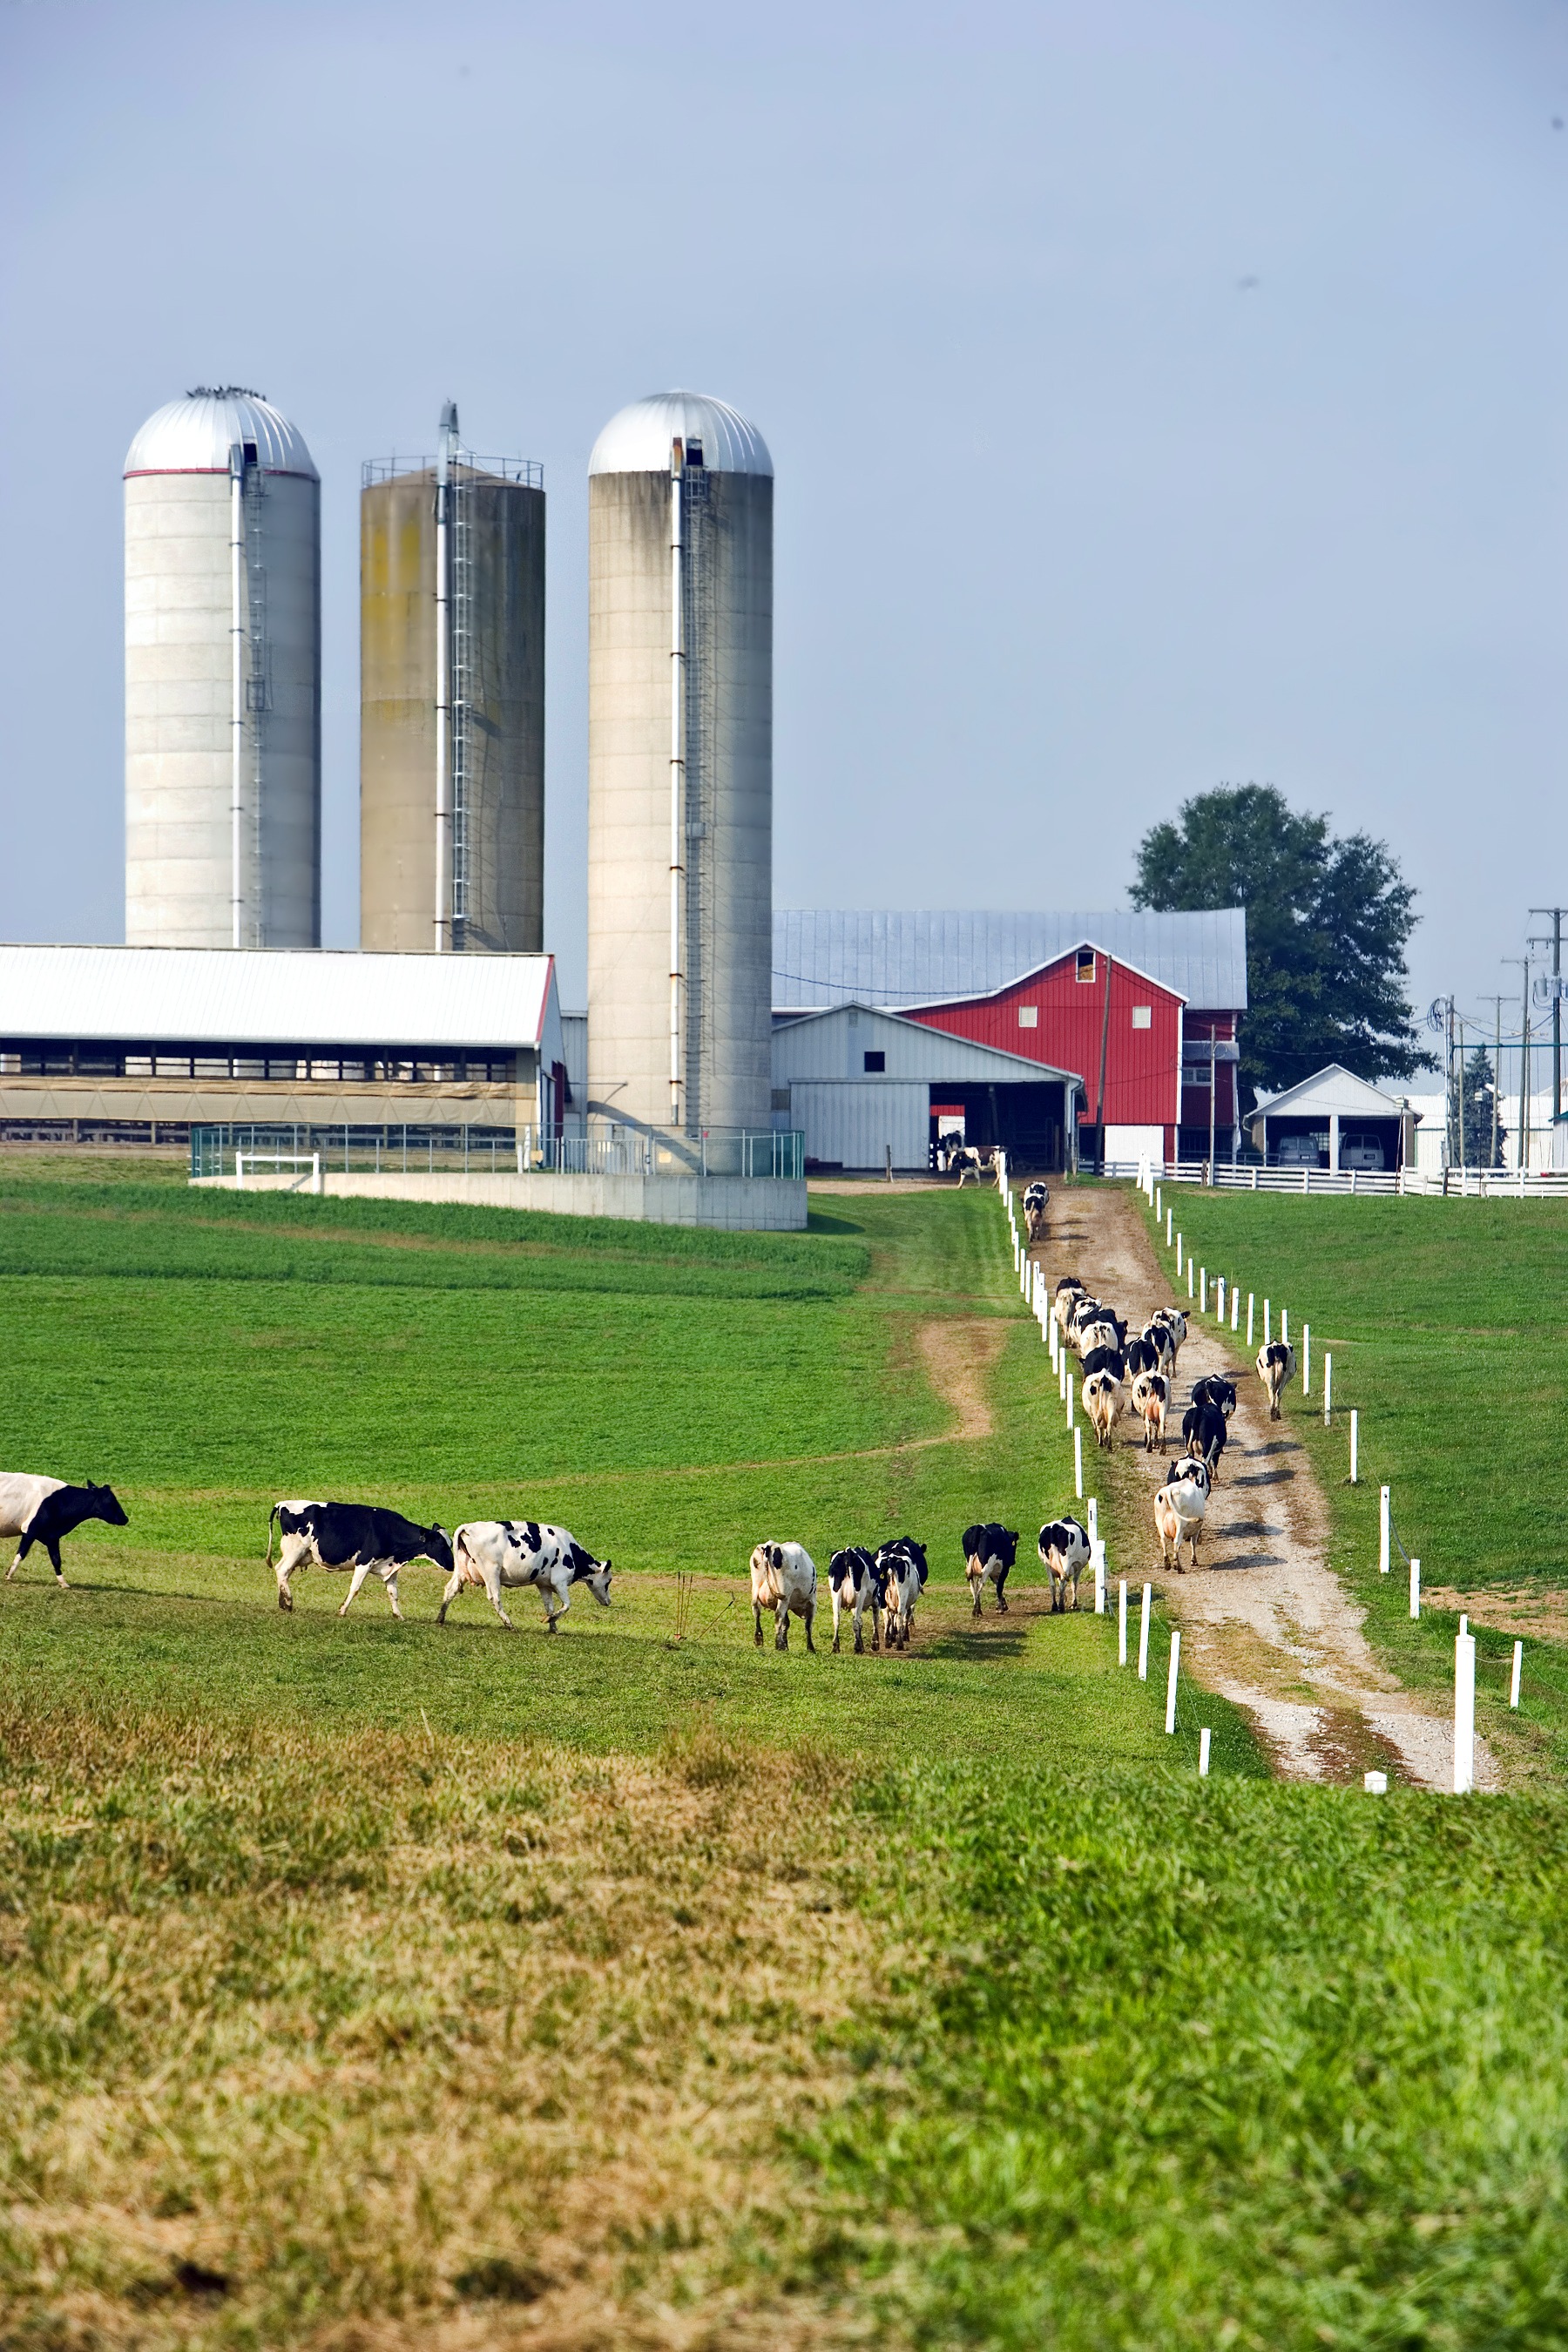 Remote view of a farm in ohio free image download